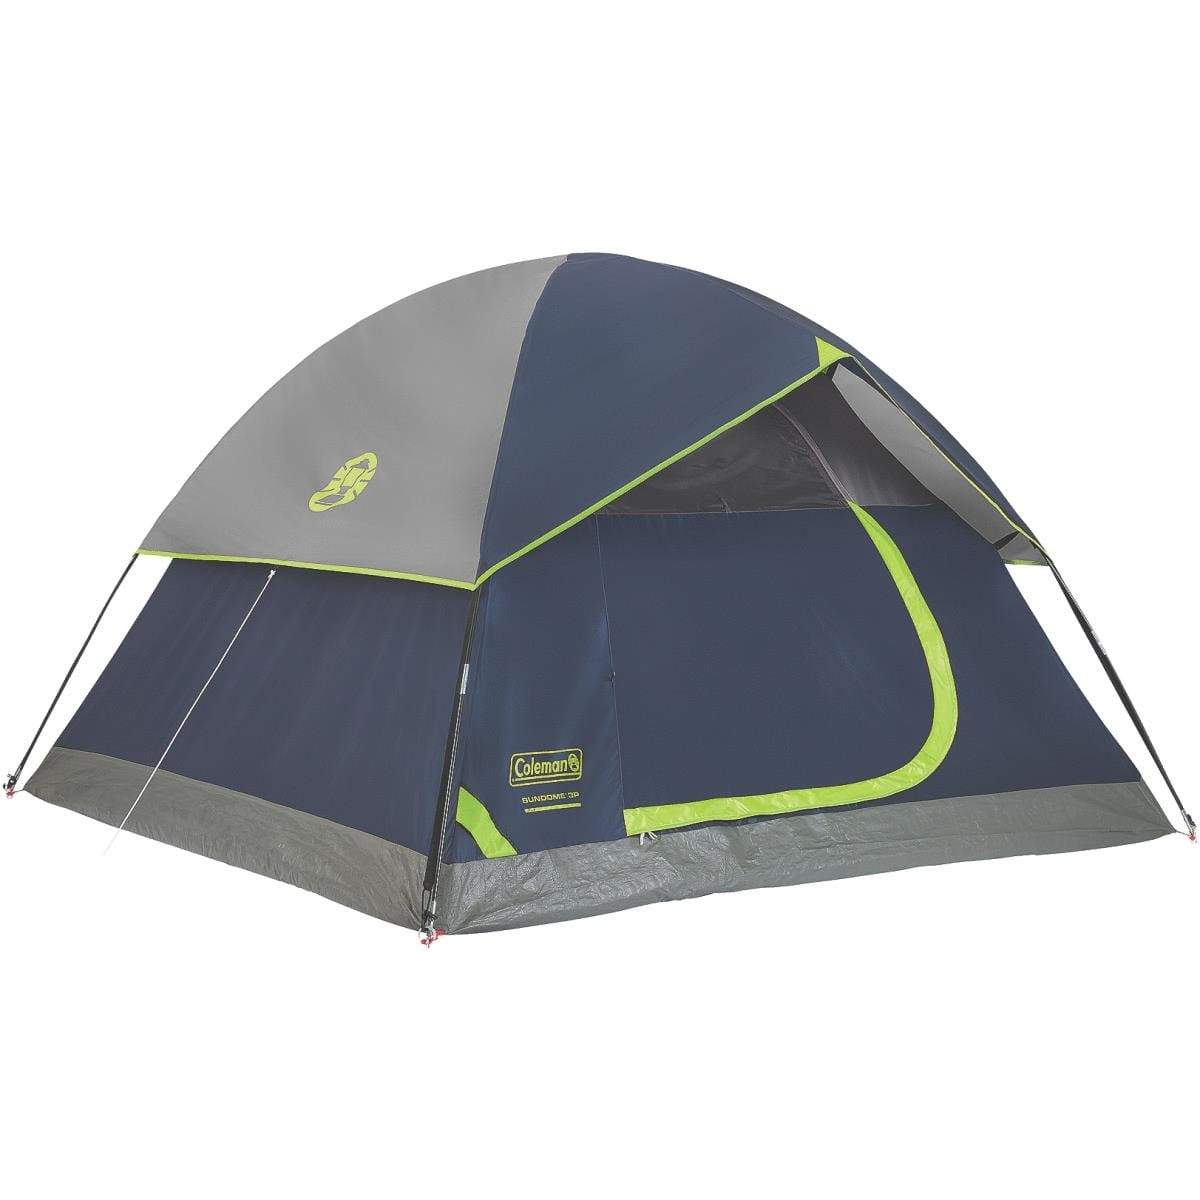 Coleman Sundome 2 Person Tent Review (Great Price) | Mountains For Everybody